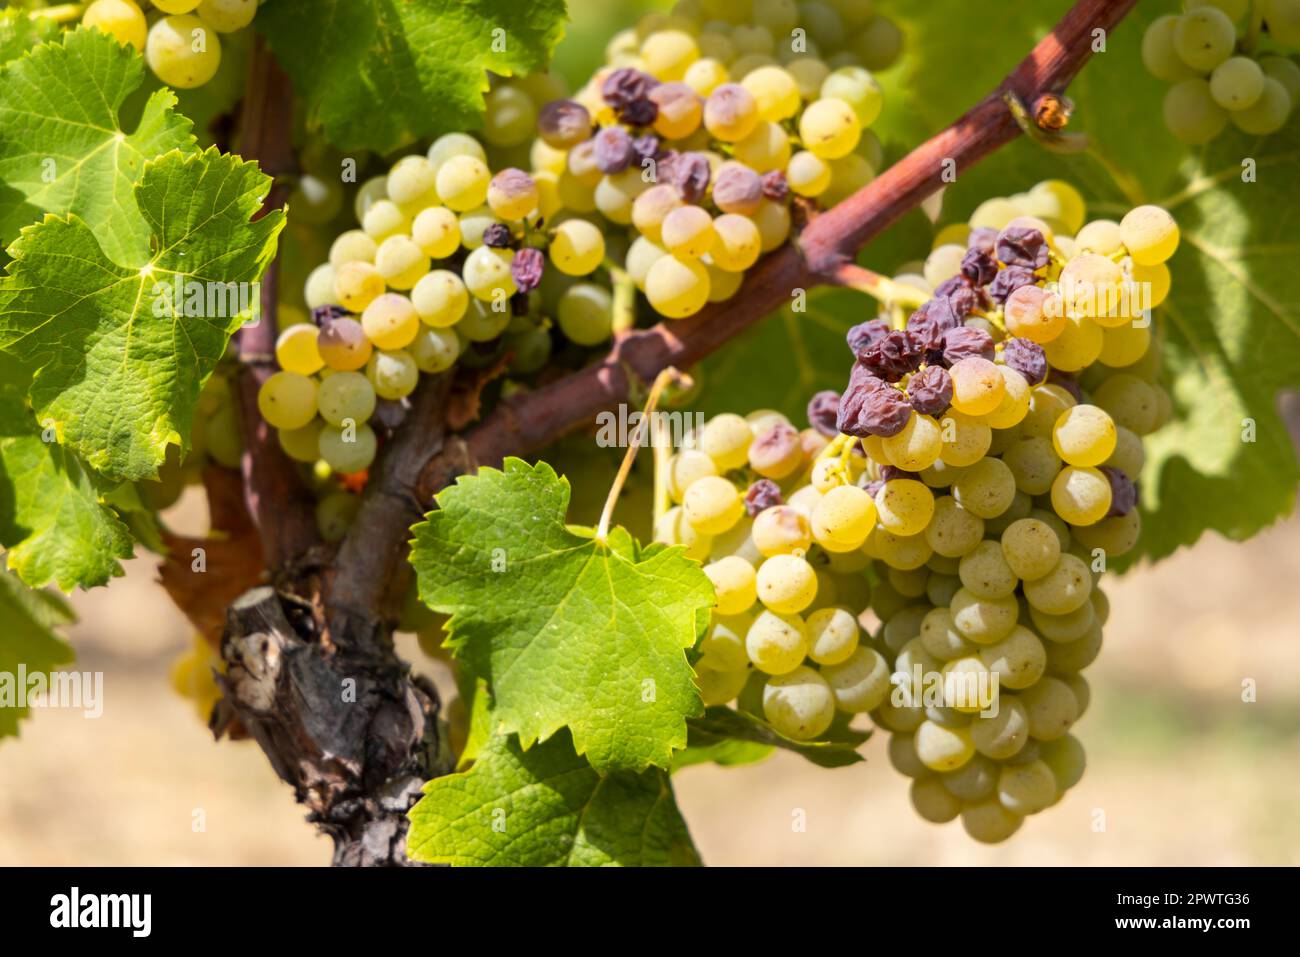 Typical grapes with botrytis cinerea for sweet wines, Sauternes, Bordeaux, Aquitaine, France Stock Photo